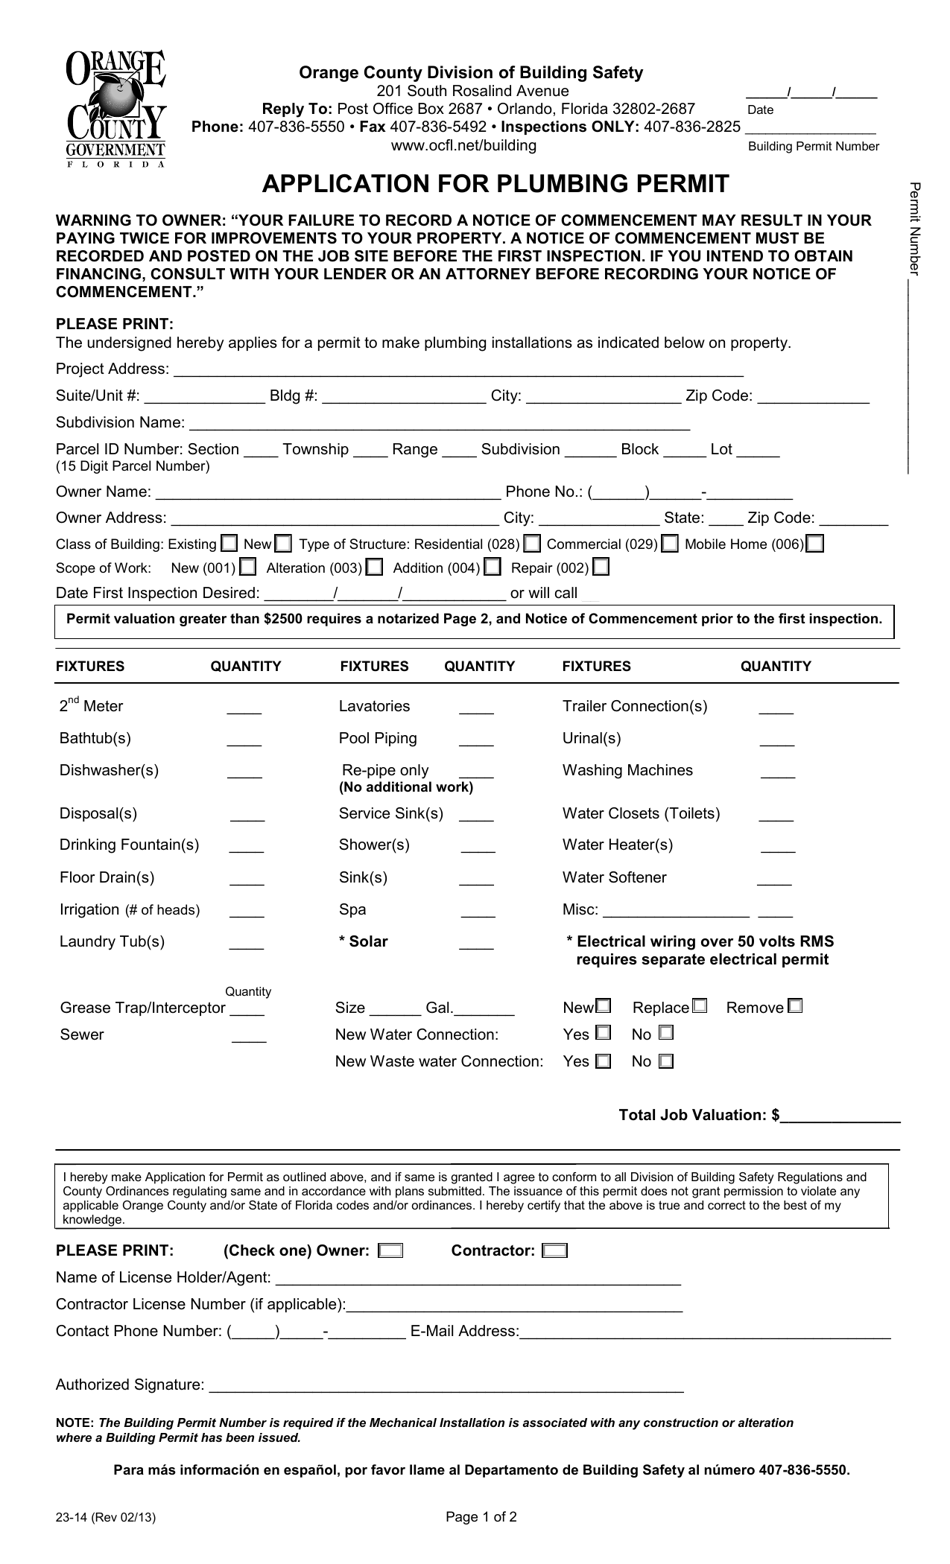 Form 23-14 Application for Plumbing Permit - Orange County, Florida, Page 1